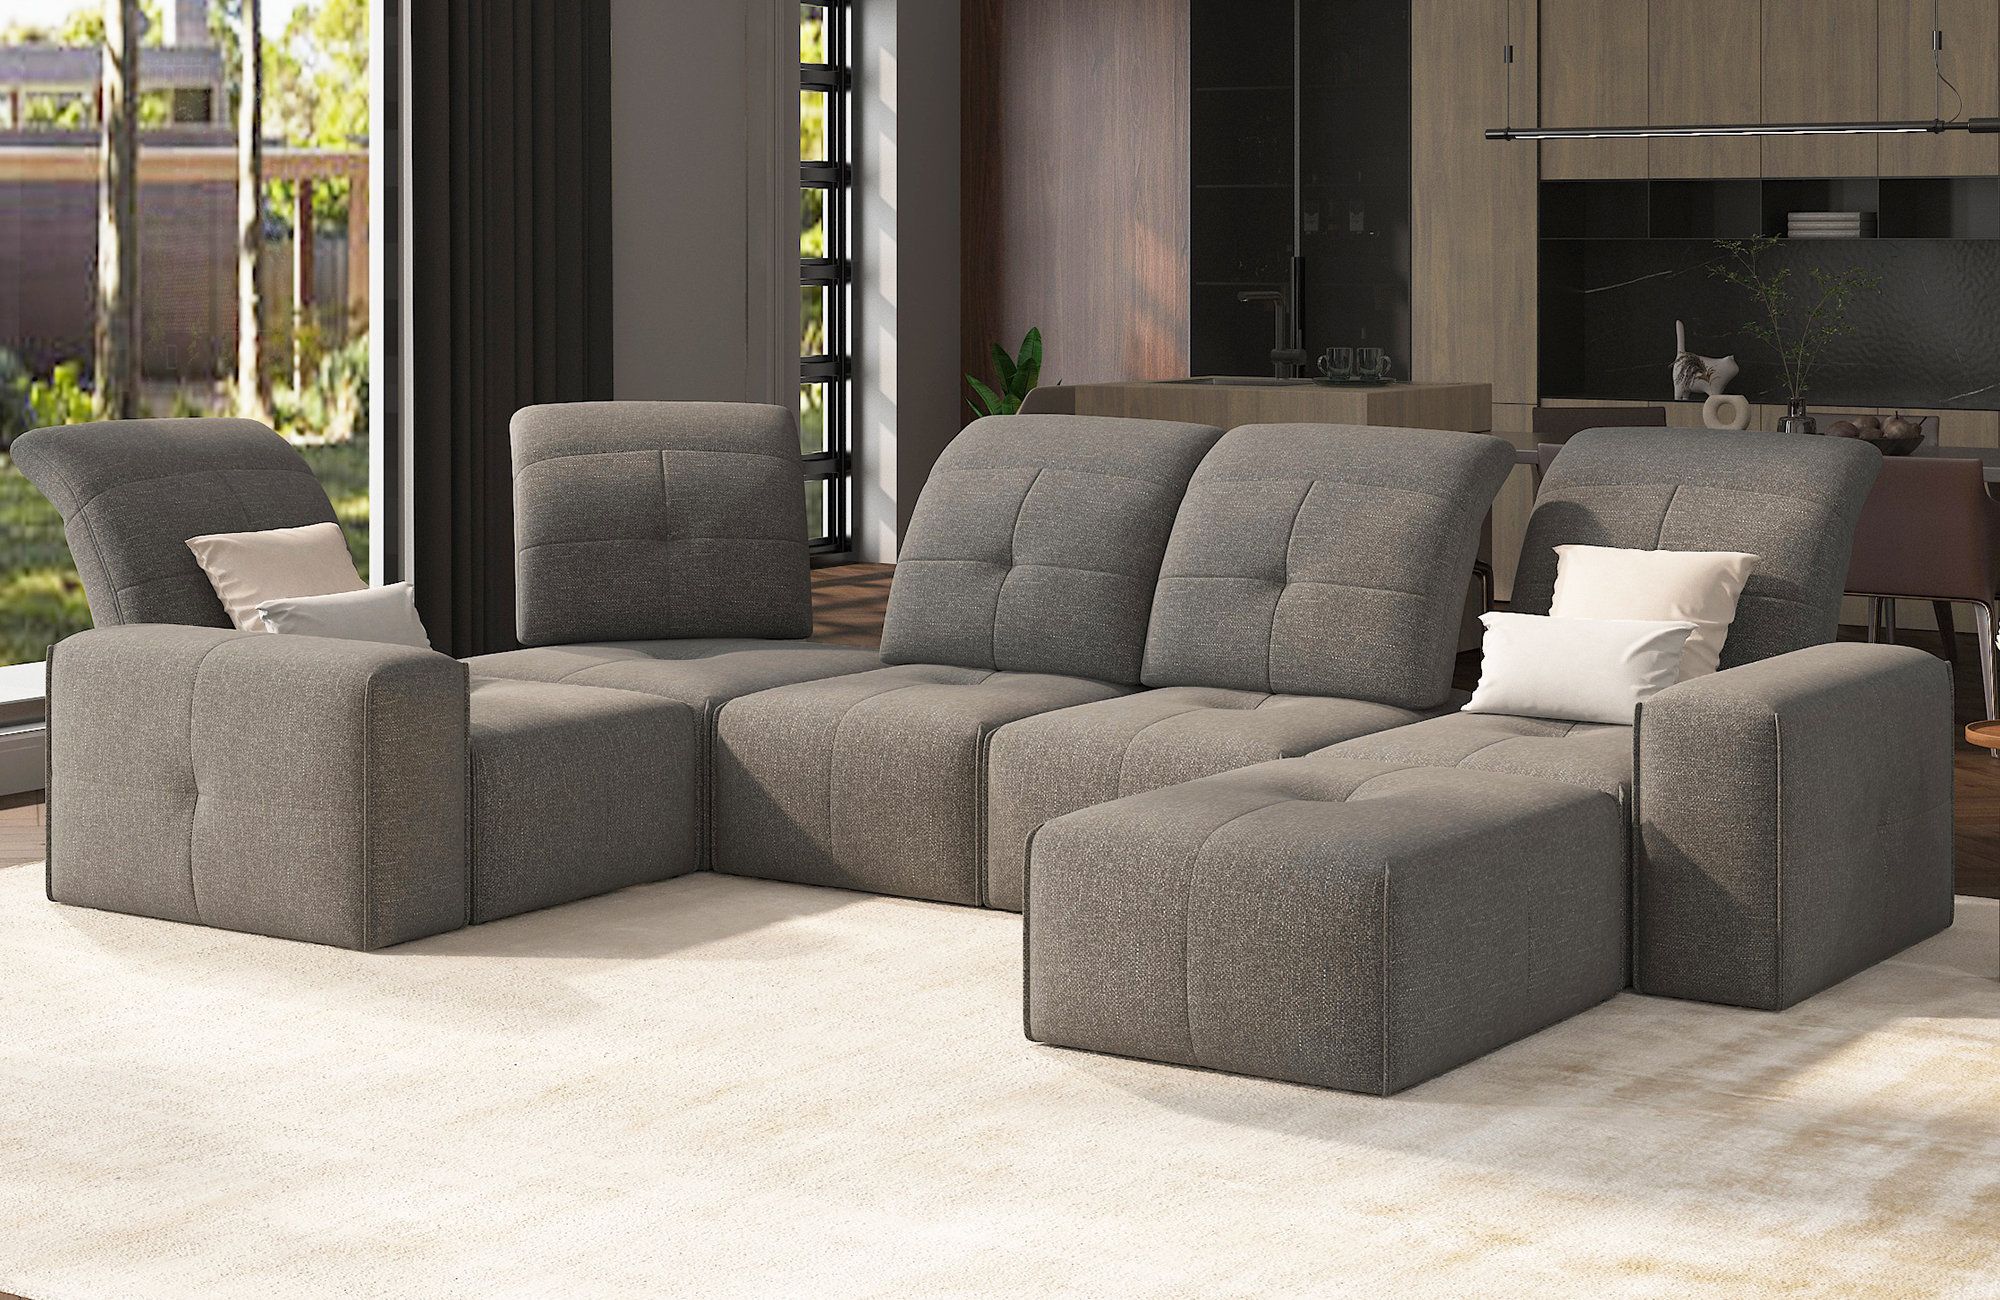 Amerlife Sectional, Modular Sofa With Recliner  6 Seats Corner Couch With  Ottoman, Adjustable Backrests And Headrests | Wayfair With Regard To 6 Seater Modular Sectional Sofas (View 12 of 20)